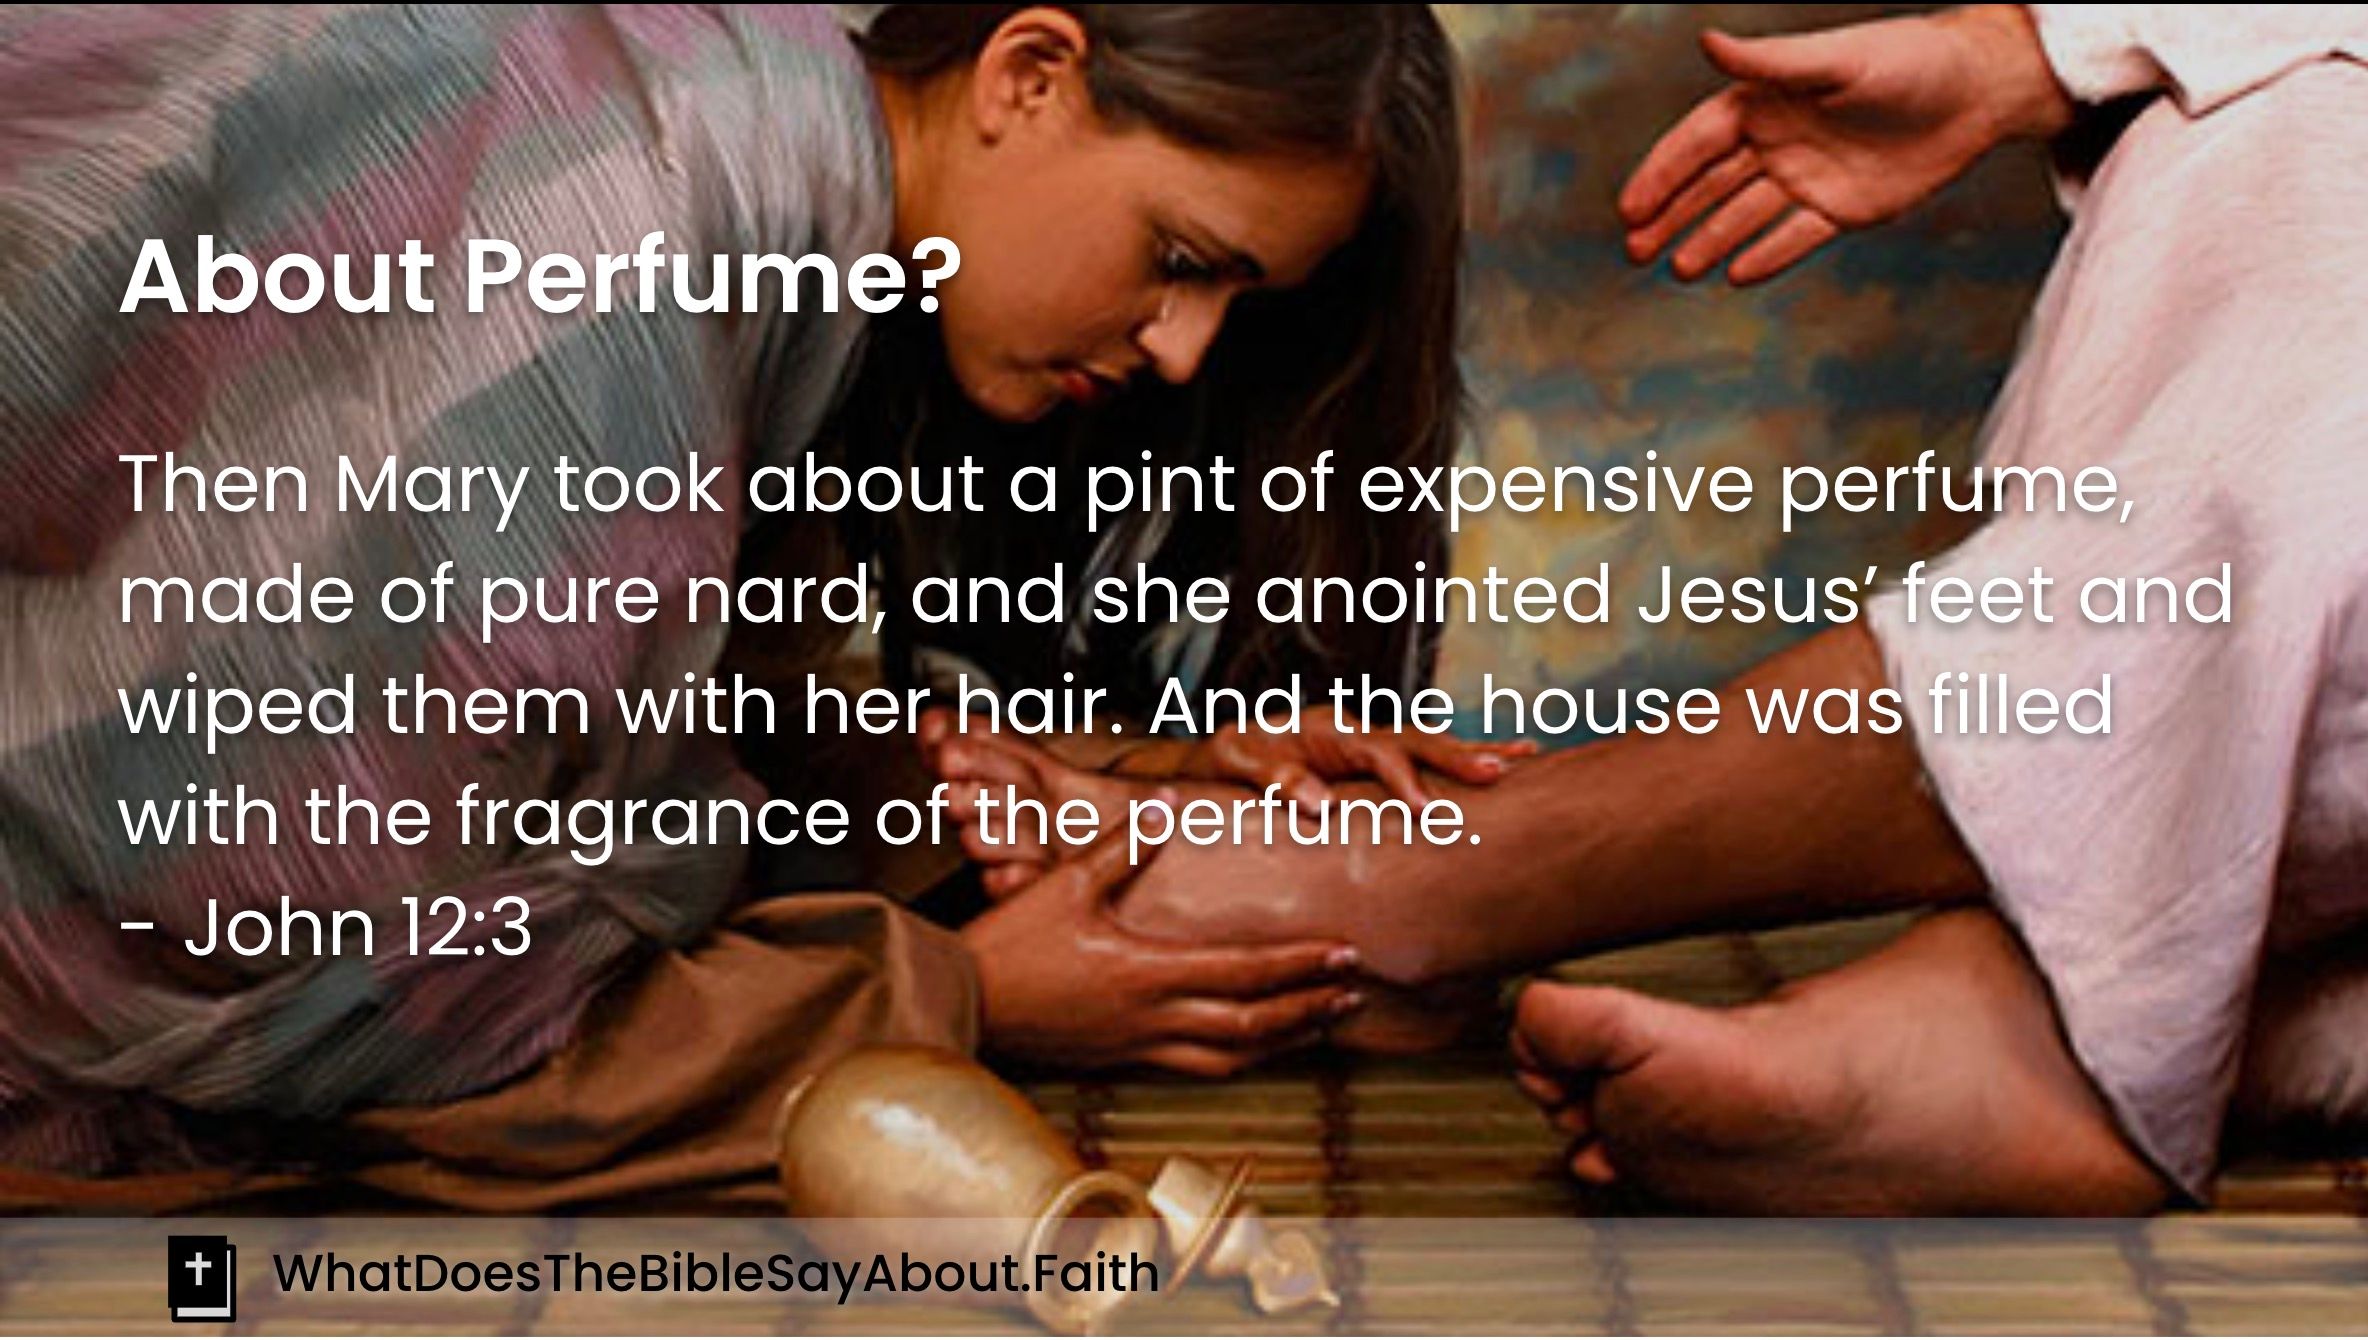 What does the bible say about perfume